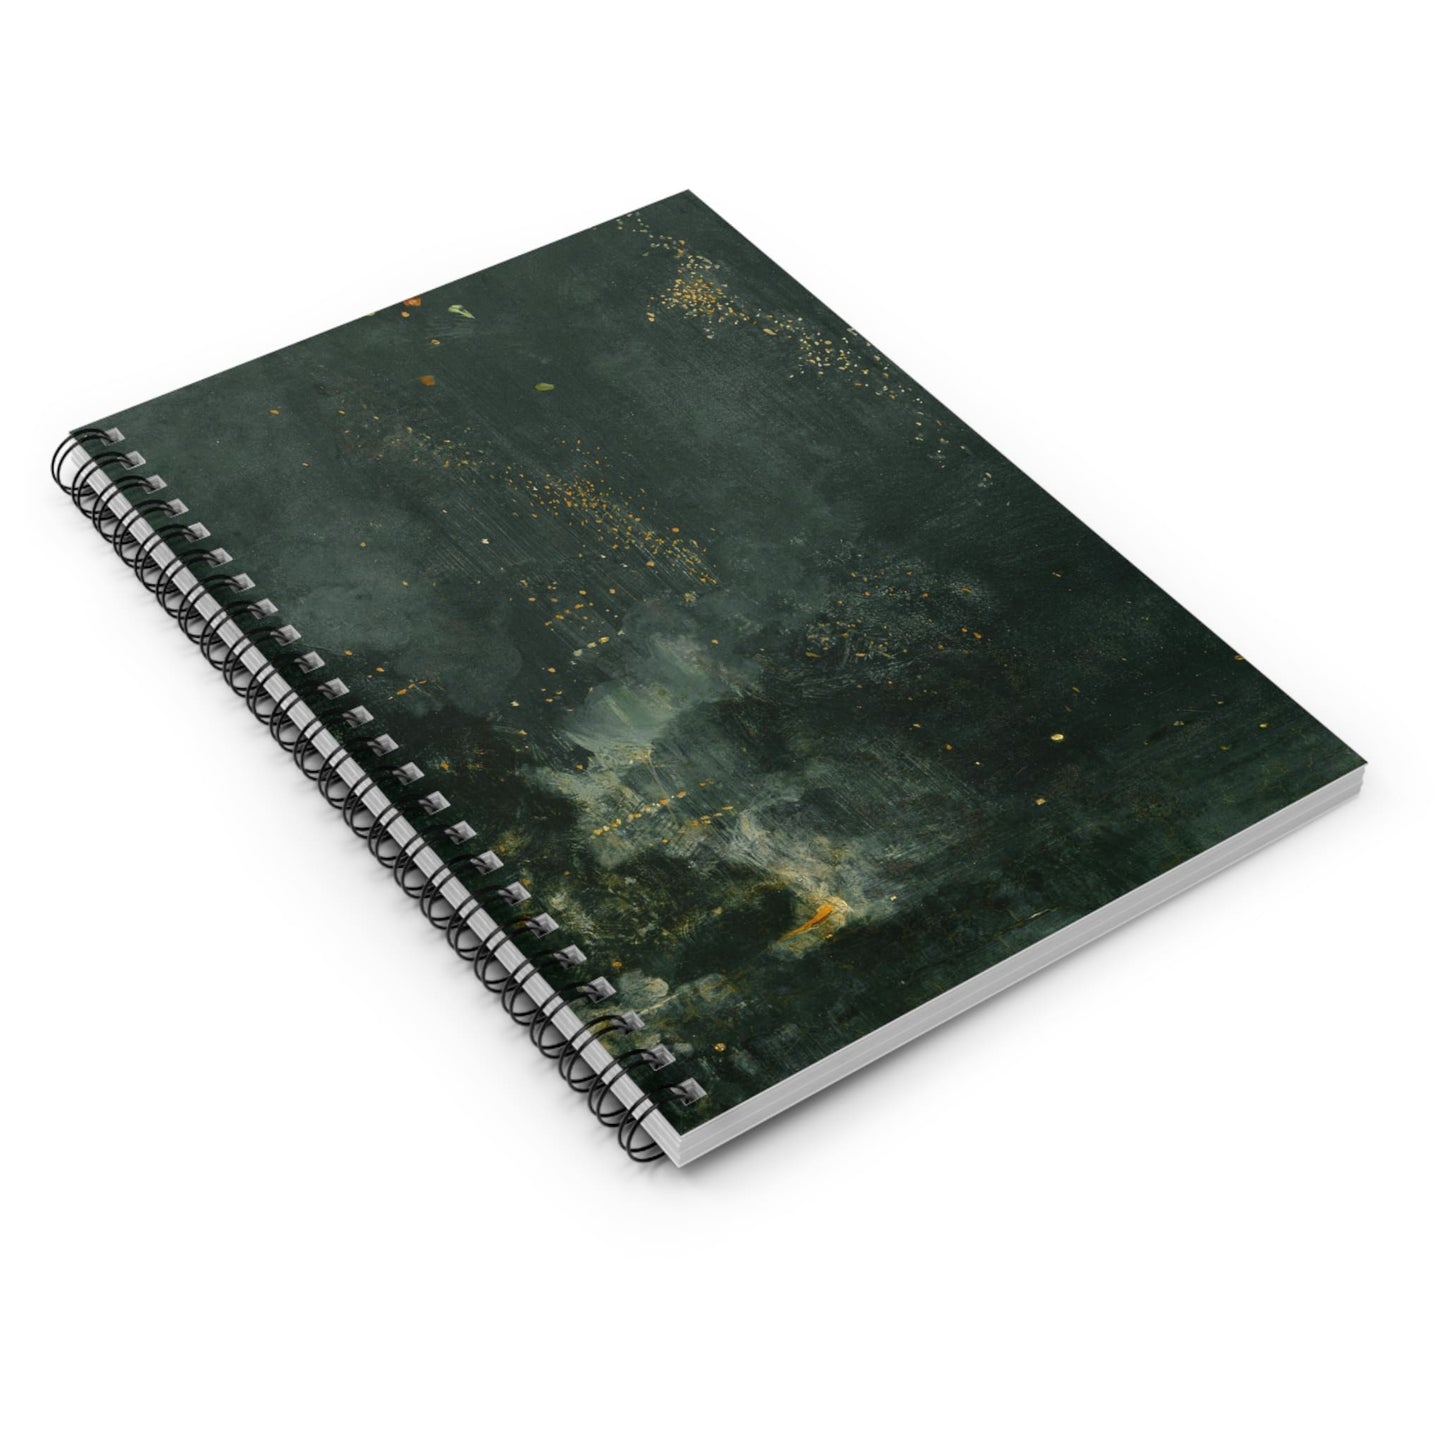 Abstract Spiral Notebook Laying Flat on White Surface